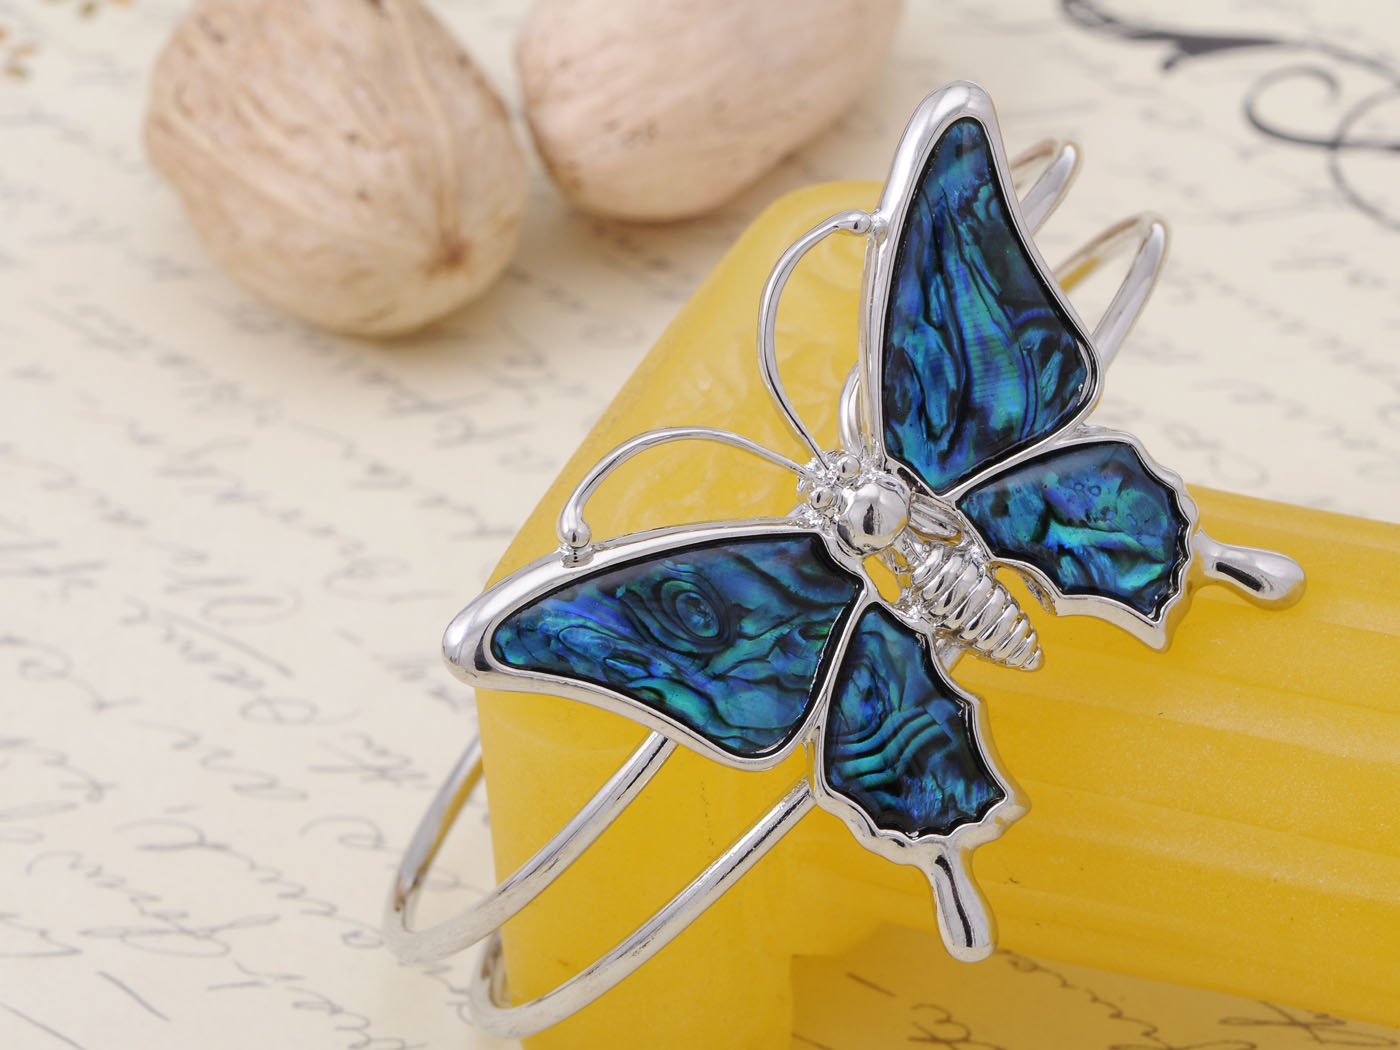 Queen Butterfly Blue Abalone Pearl Shell Wing Double Band Bracelet Bangle